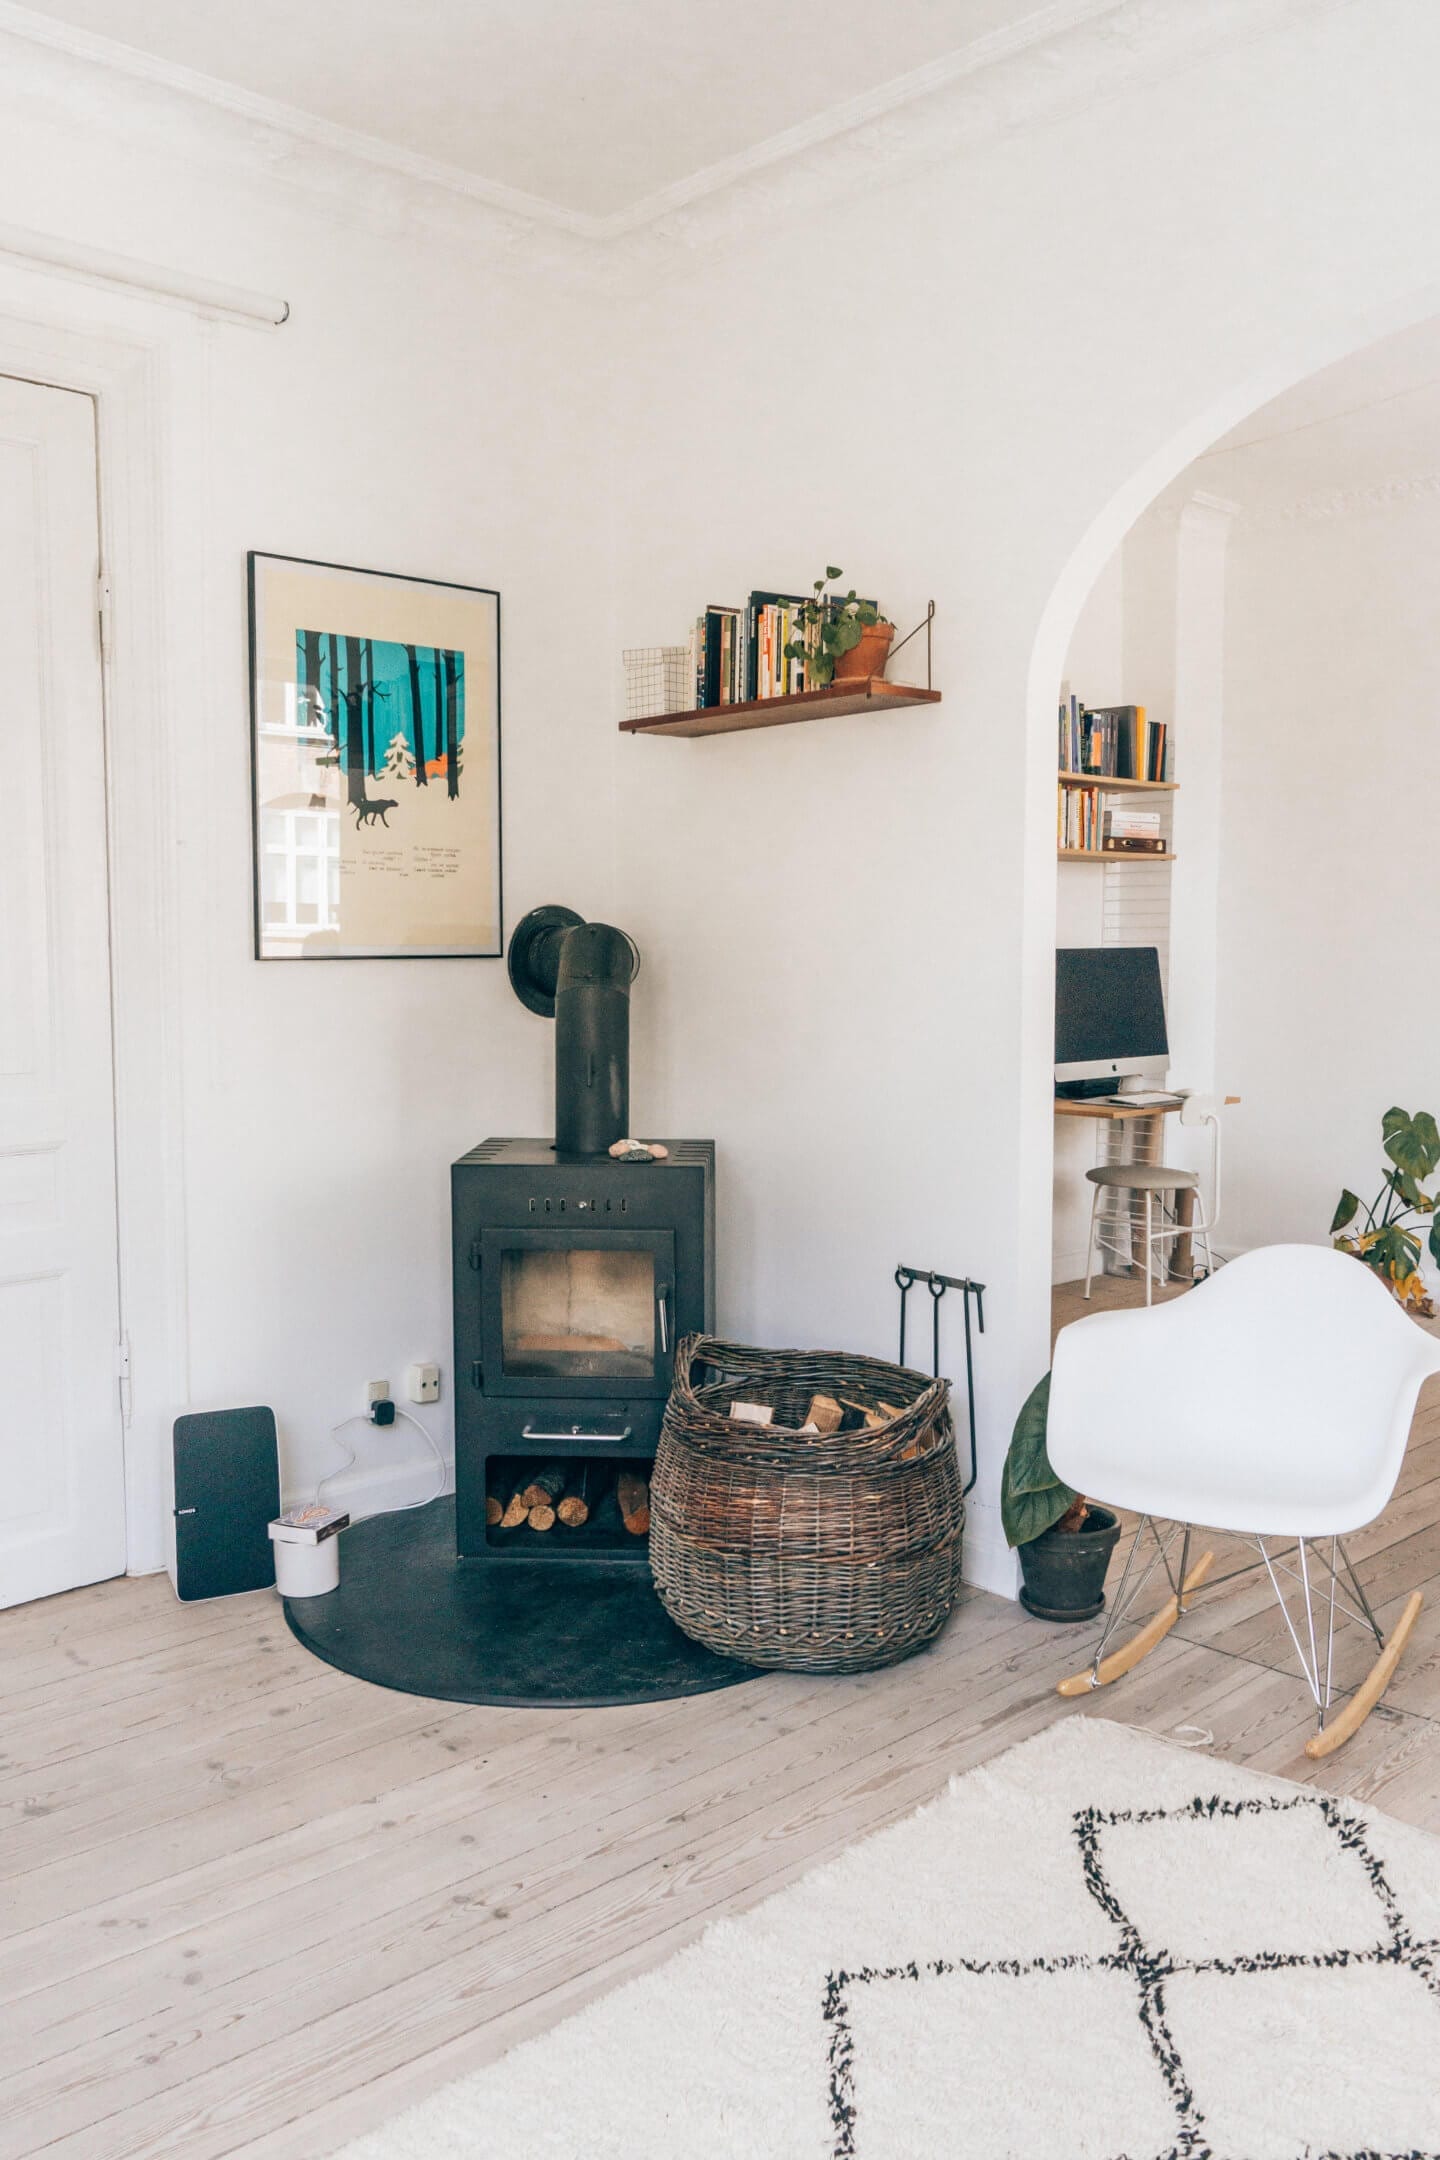 The fireplace and chair in the living room of our Copenhagen Airbnb